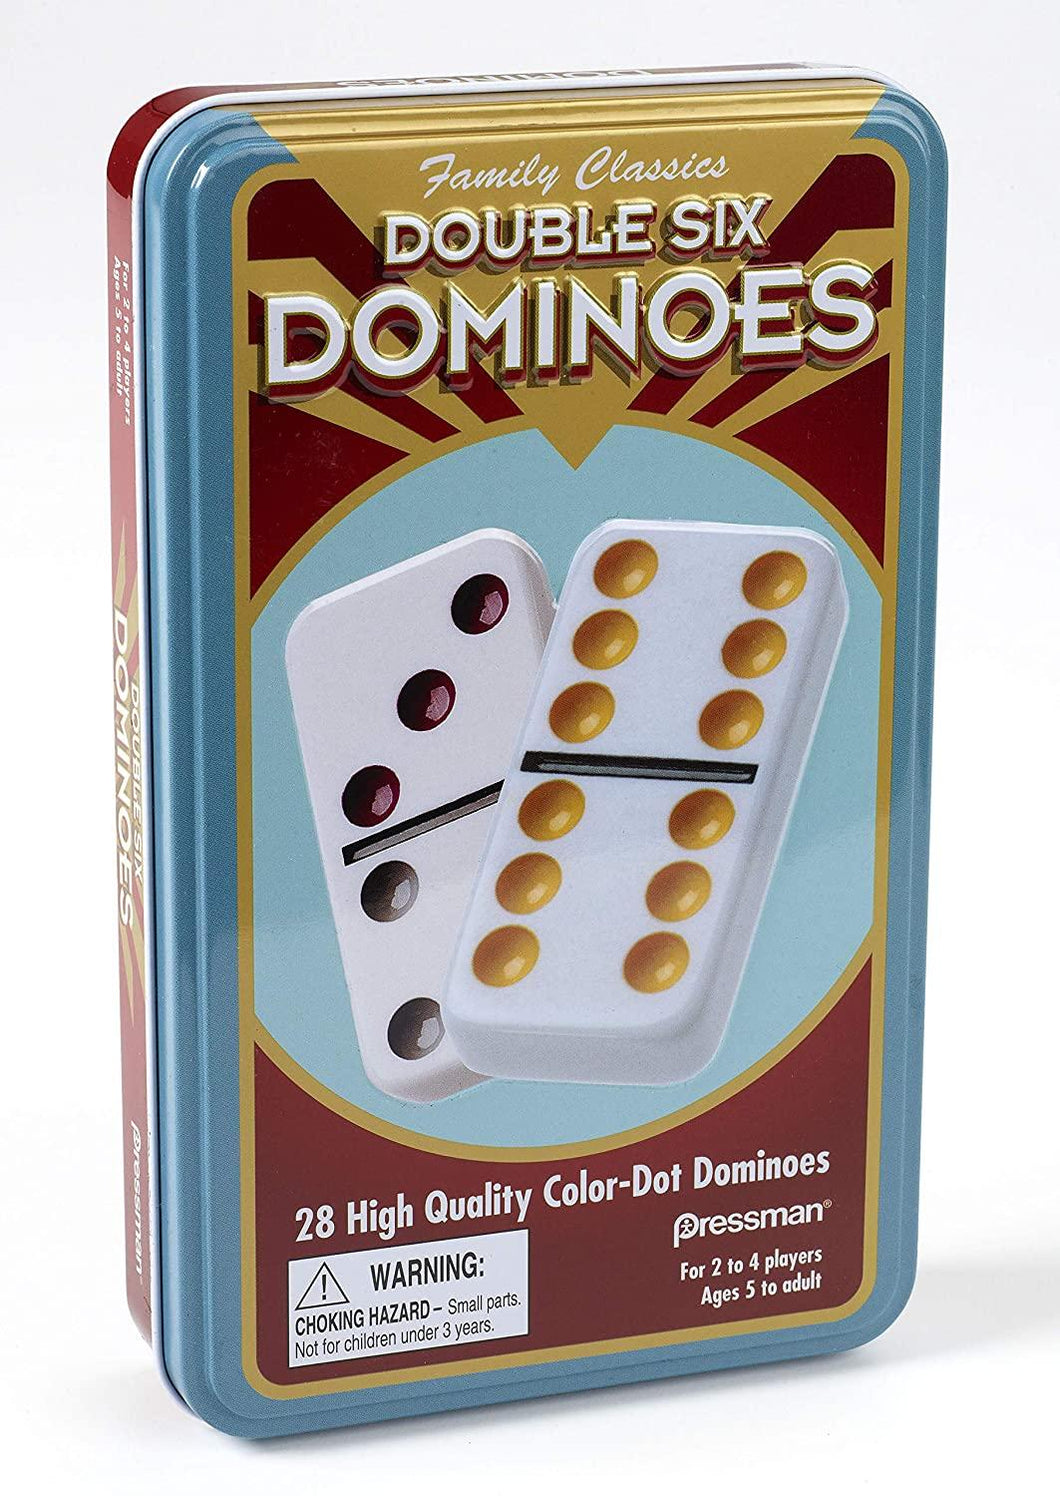 Dominoes Dbl 6 TIN Color